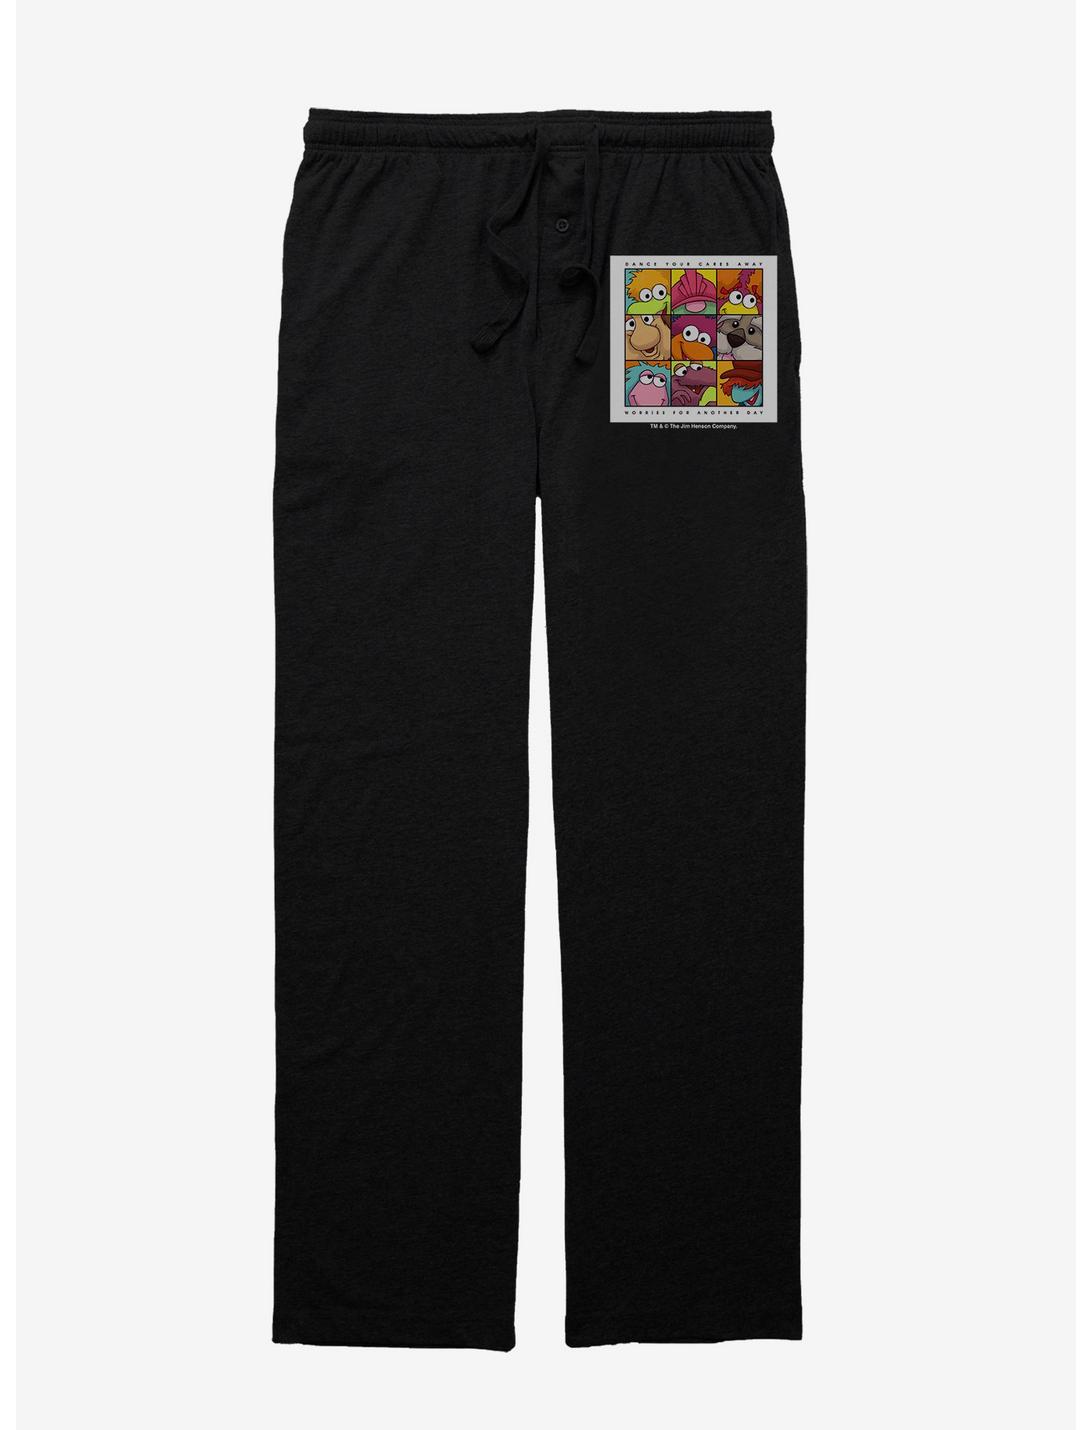 Jim Henson's Fraggle Rock Worries For Another Day Pajama Pants, BLACK, hi-res